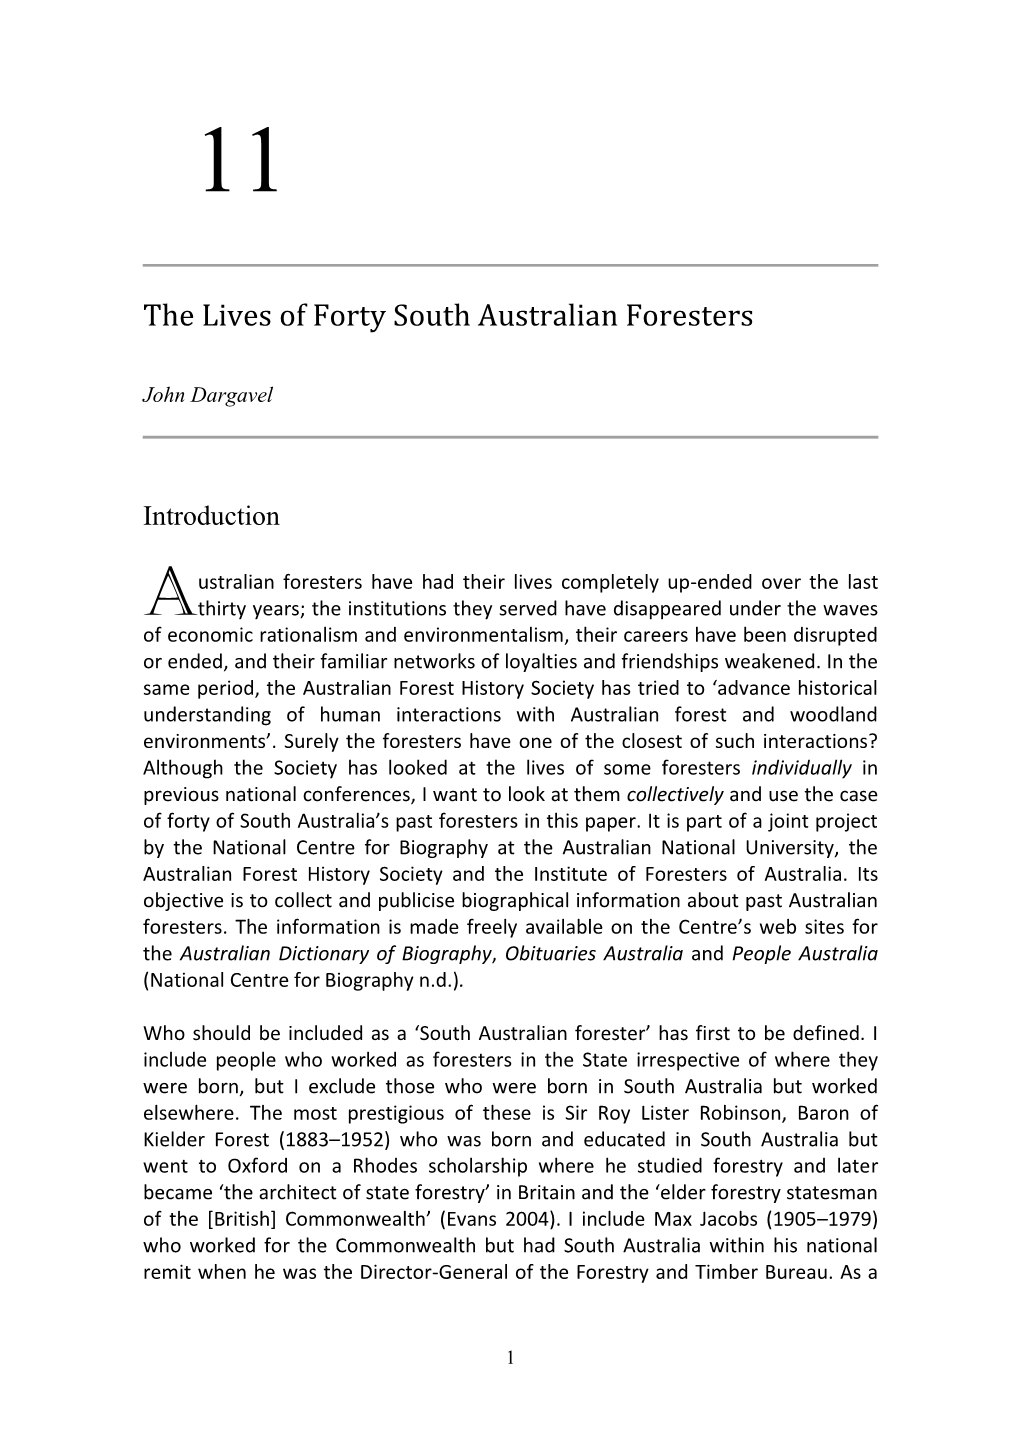 The Lives of Forty South Australian Foresters